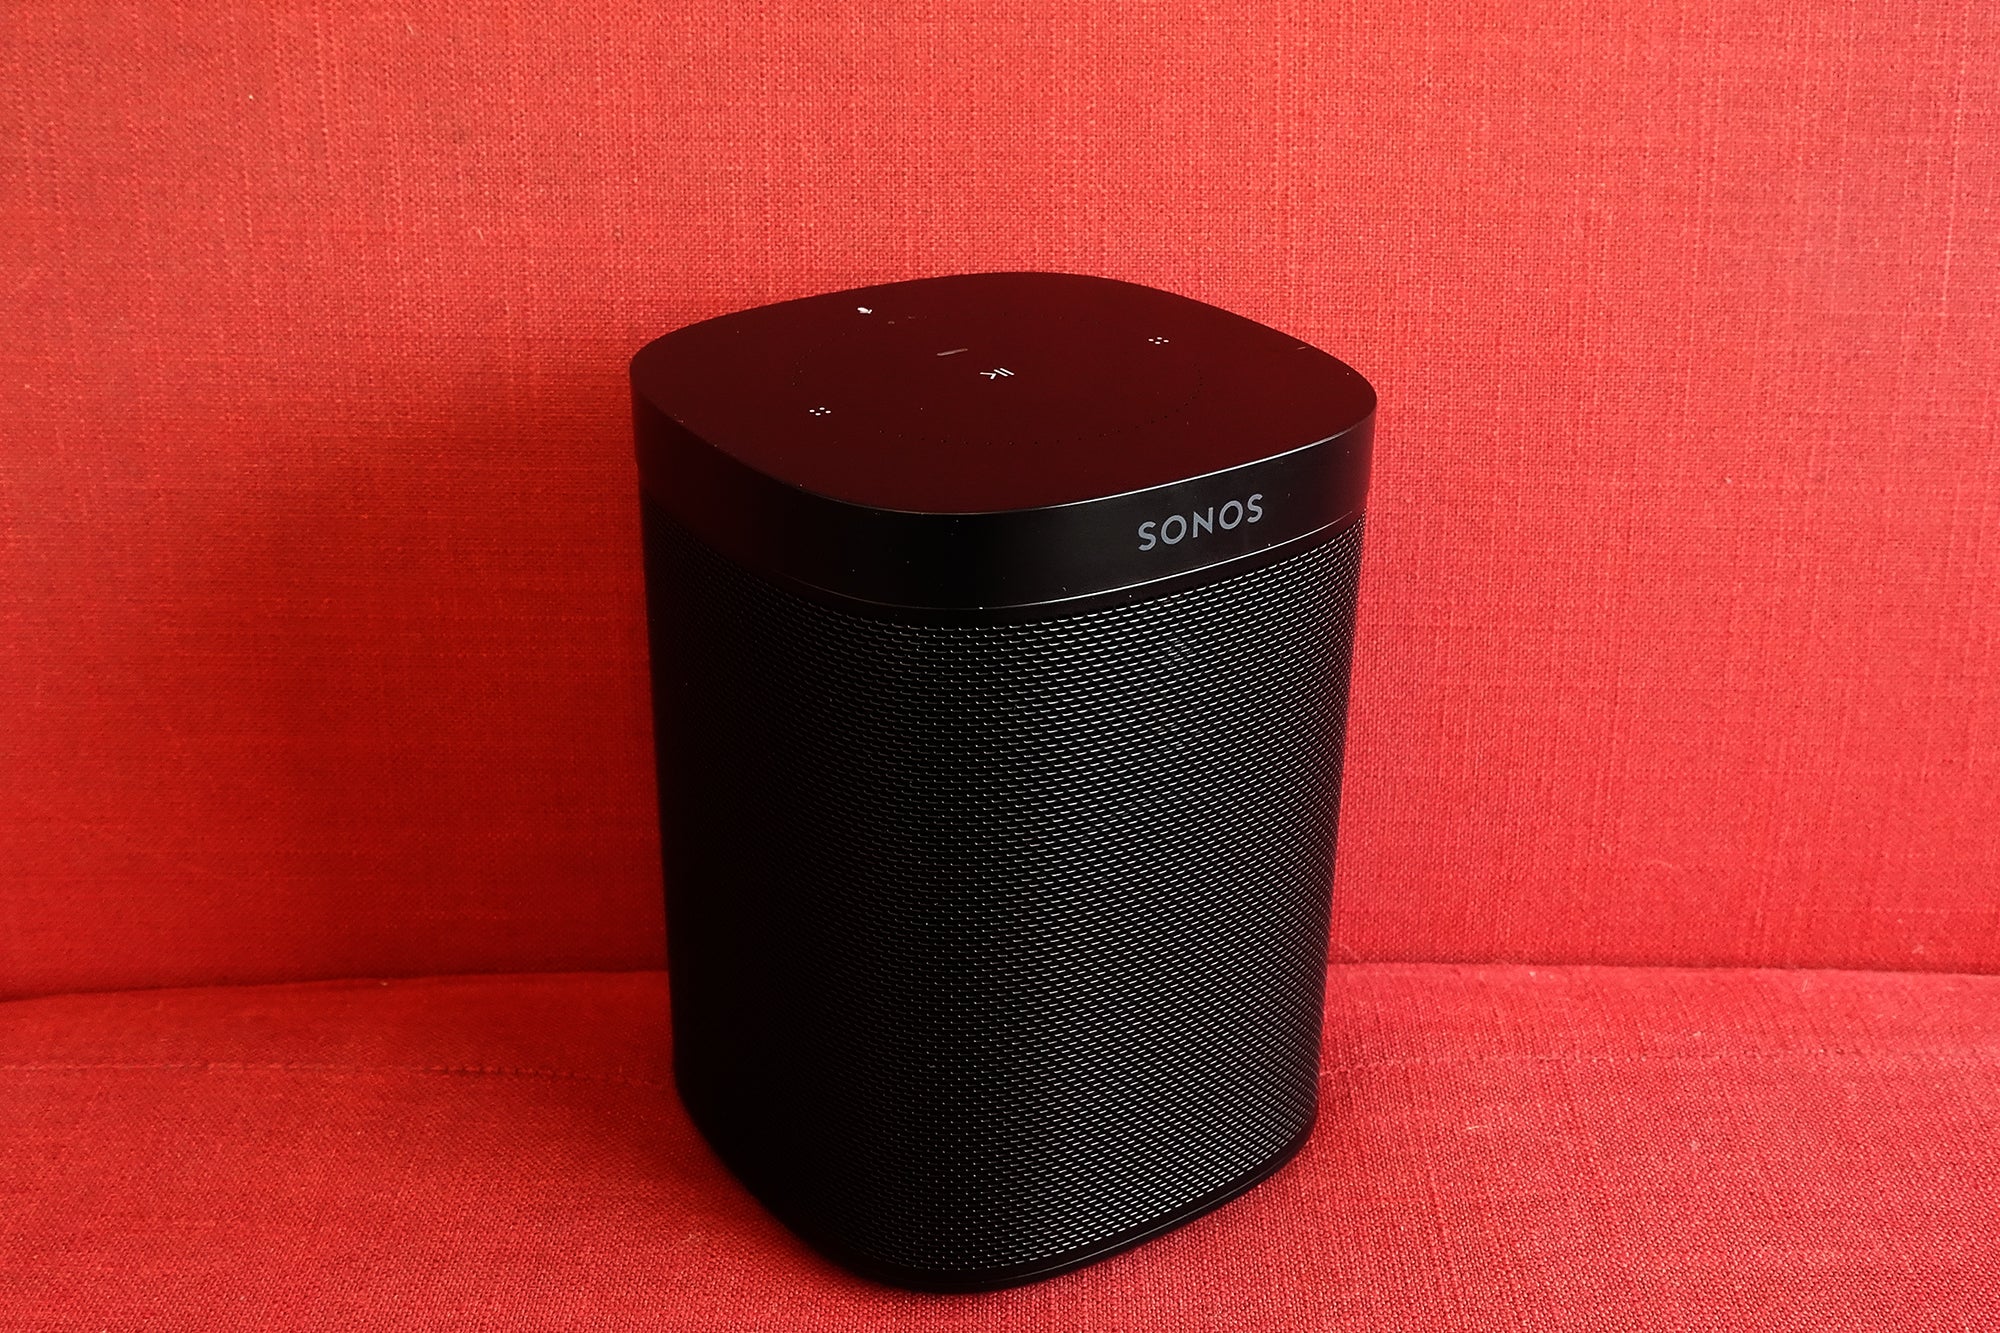 One Review: One smart speaker to all? | Trusted Reviews